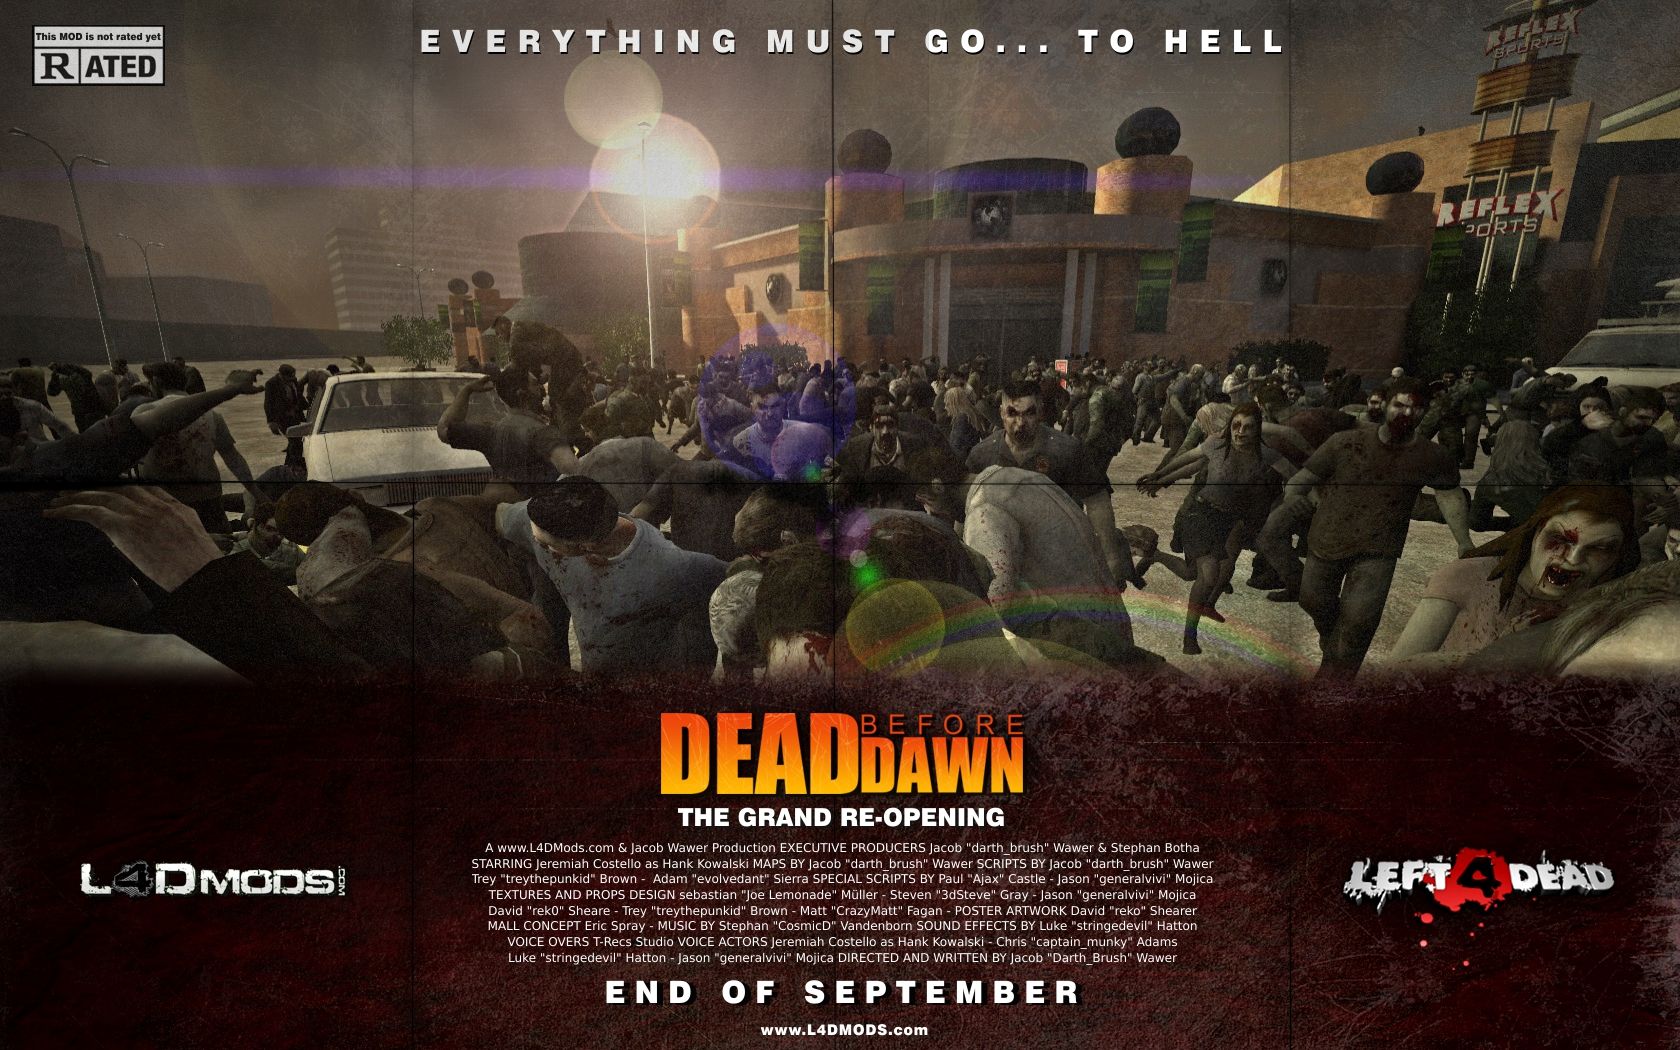 House of the Dead Wallpaper. Day of the Dead Wallpaper, Day of the Dead Skull Wallpaper and Walking Dead Wallpaper